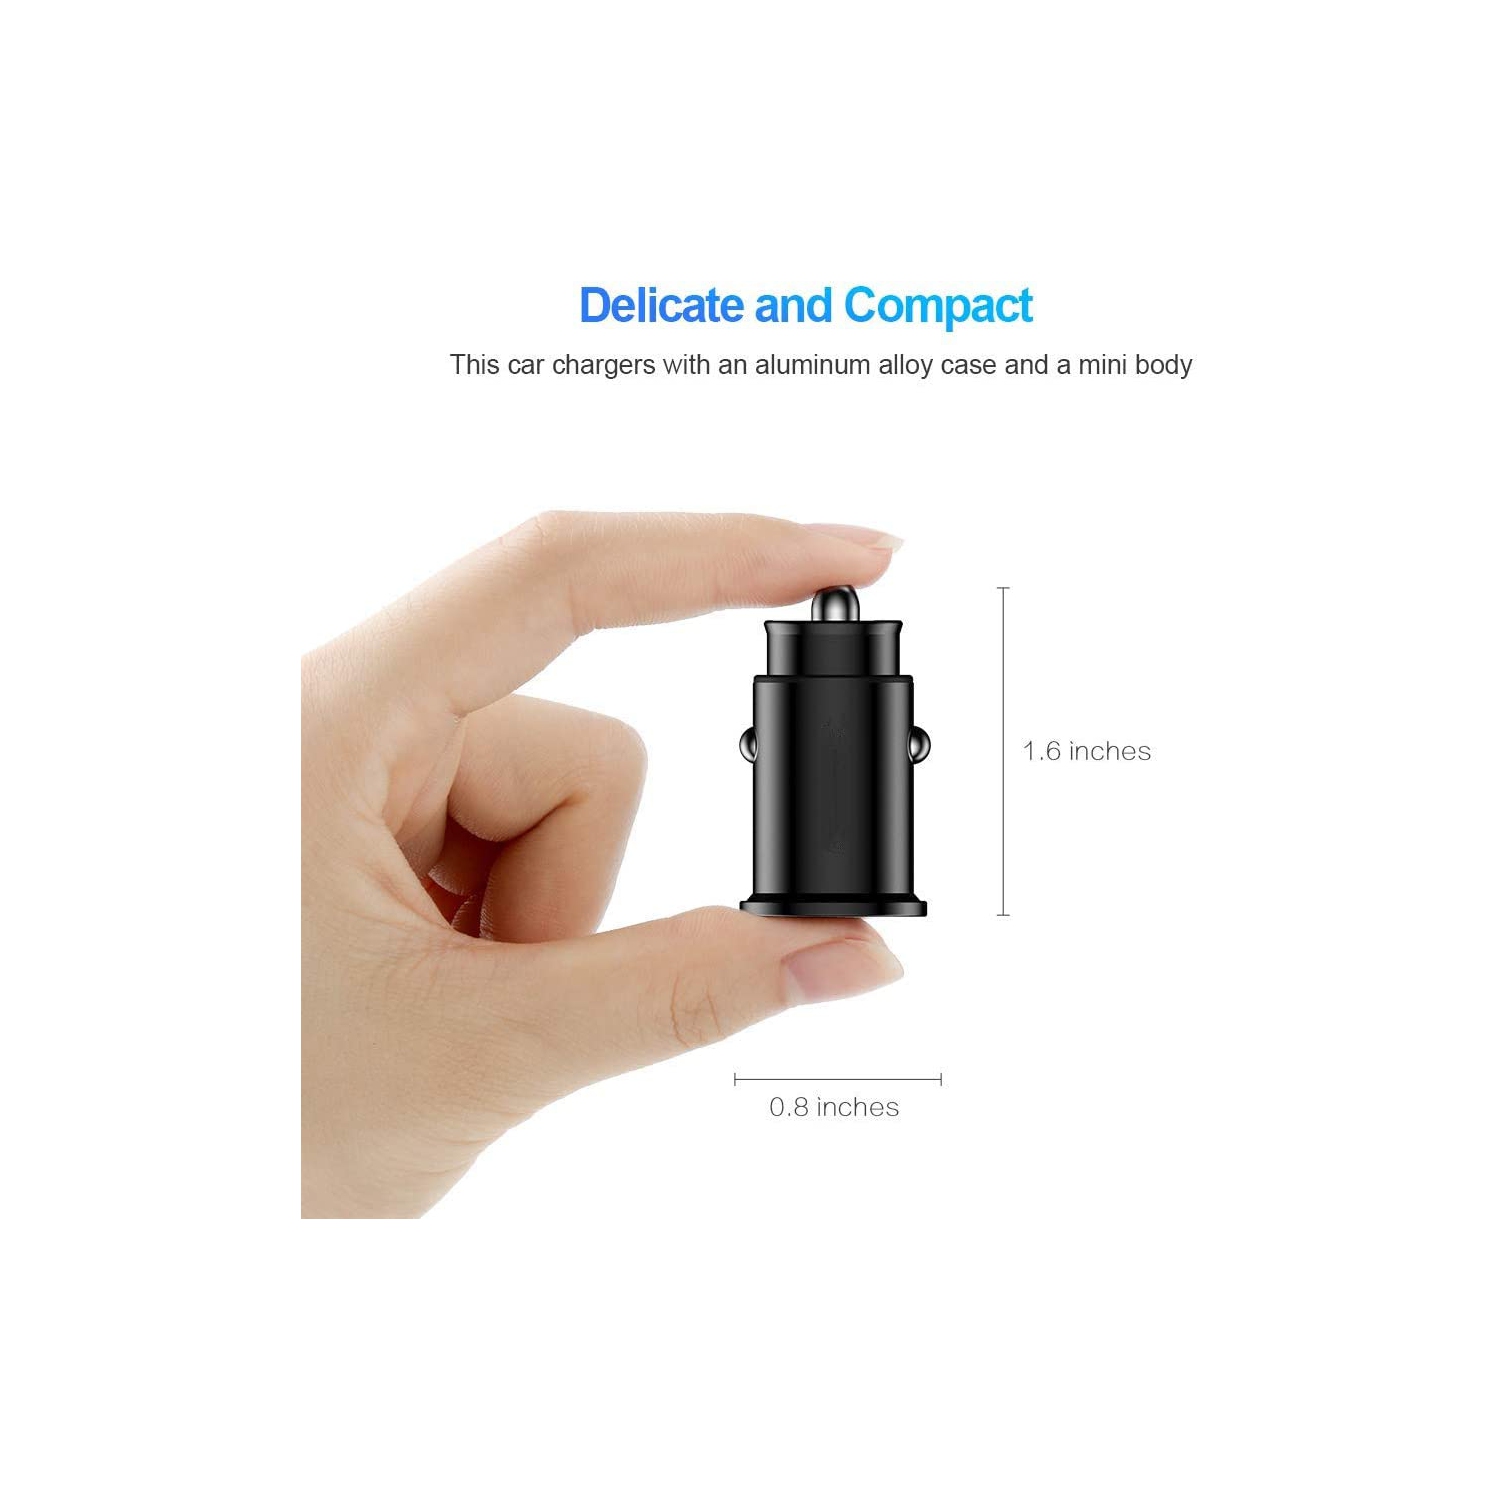 Car Charger, 4.8A 24W Aluminum Alloy Car Charger Mini Dual Fast Flush Car Charger Adapter Compatible with iPhone 13 12 11 Pro Xs Max XR X 8 7 Plus iPad Samsung Galaxy S21 S